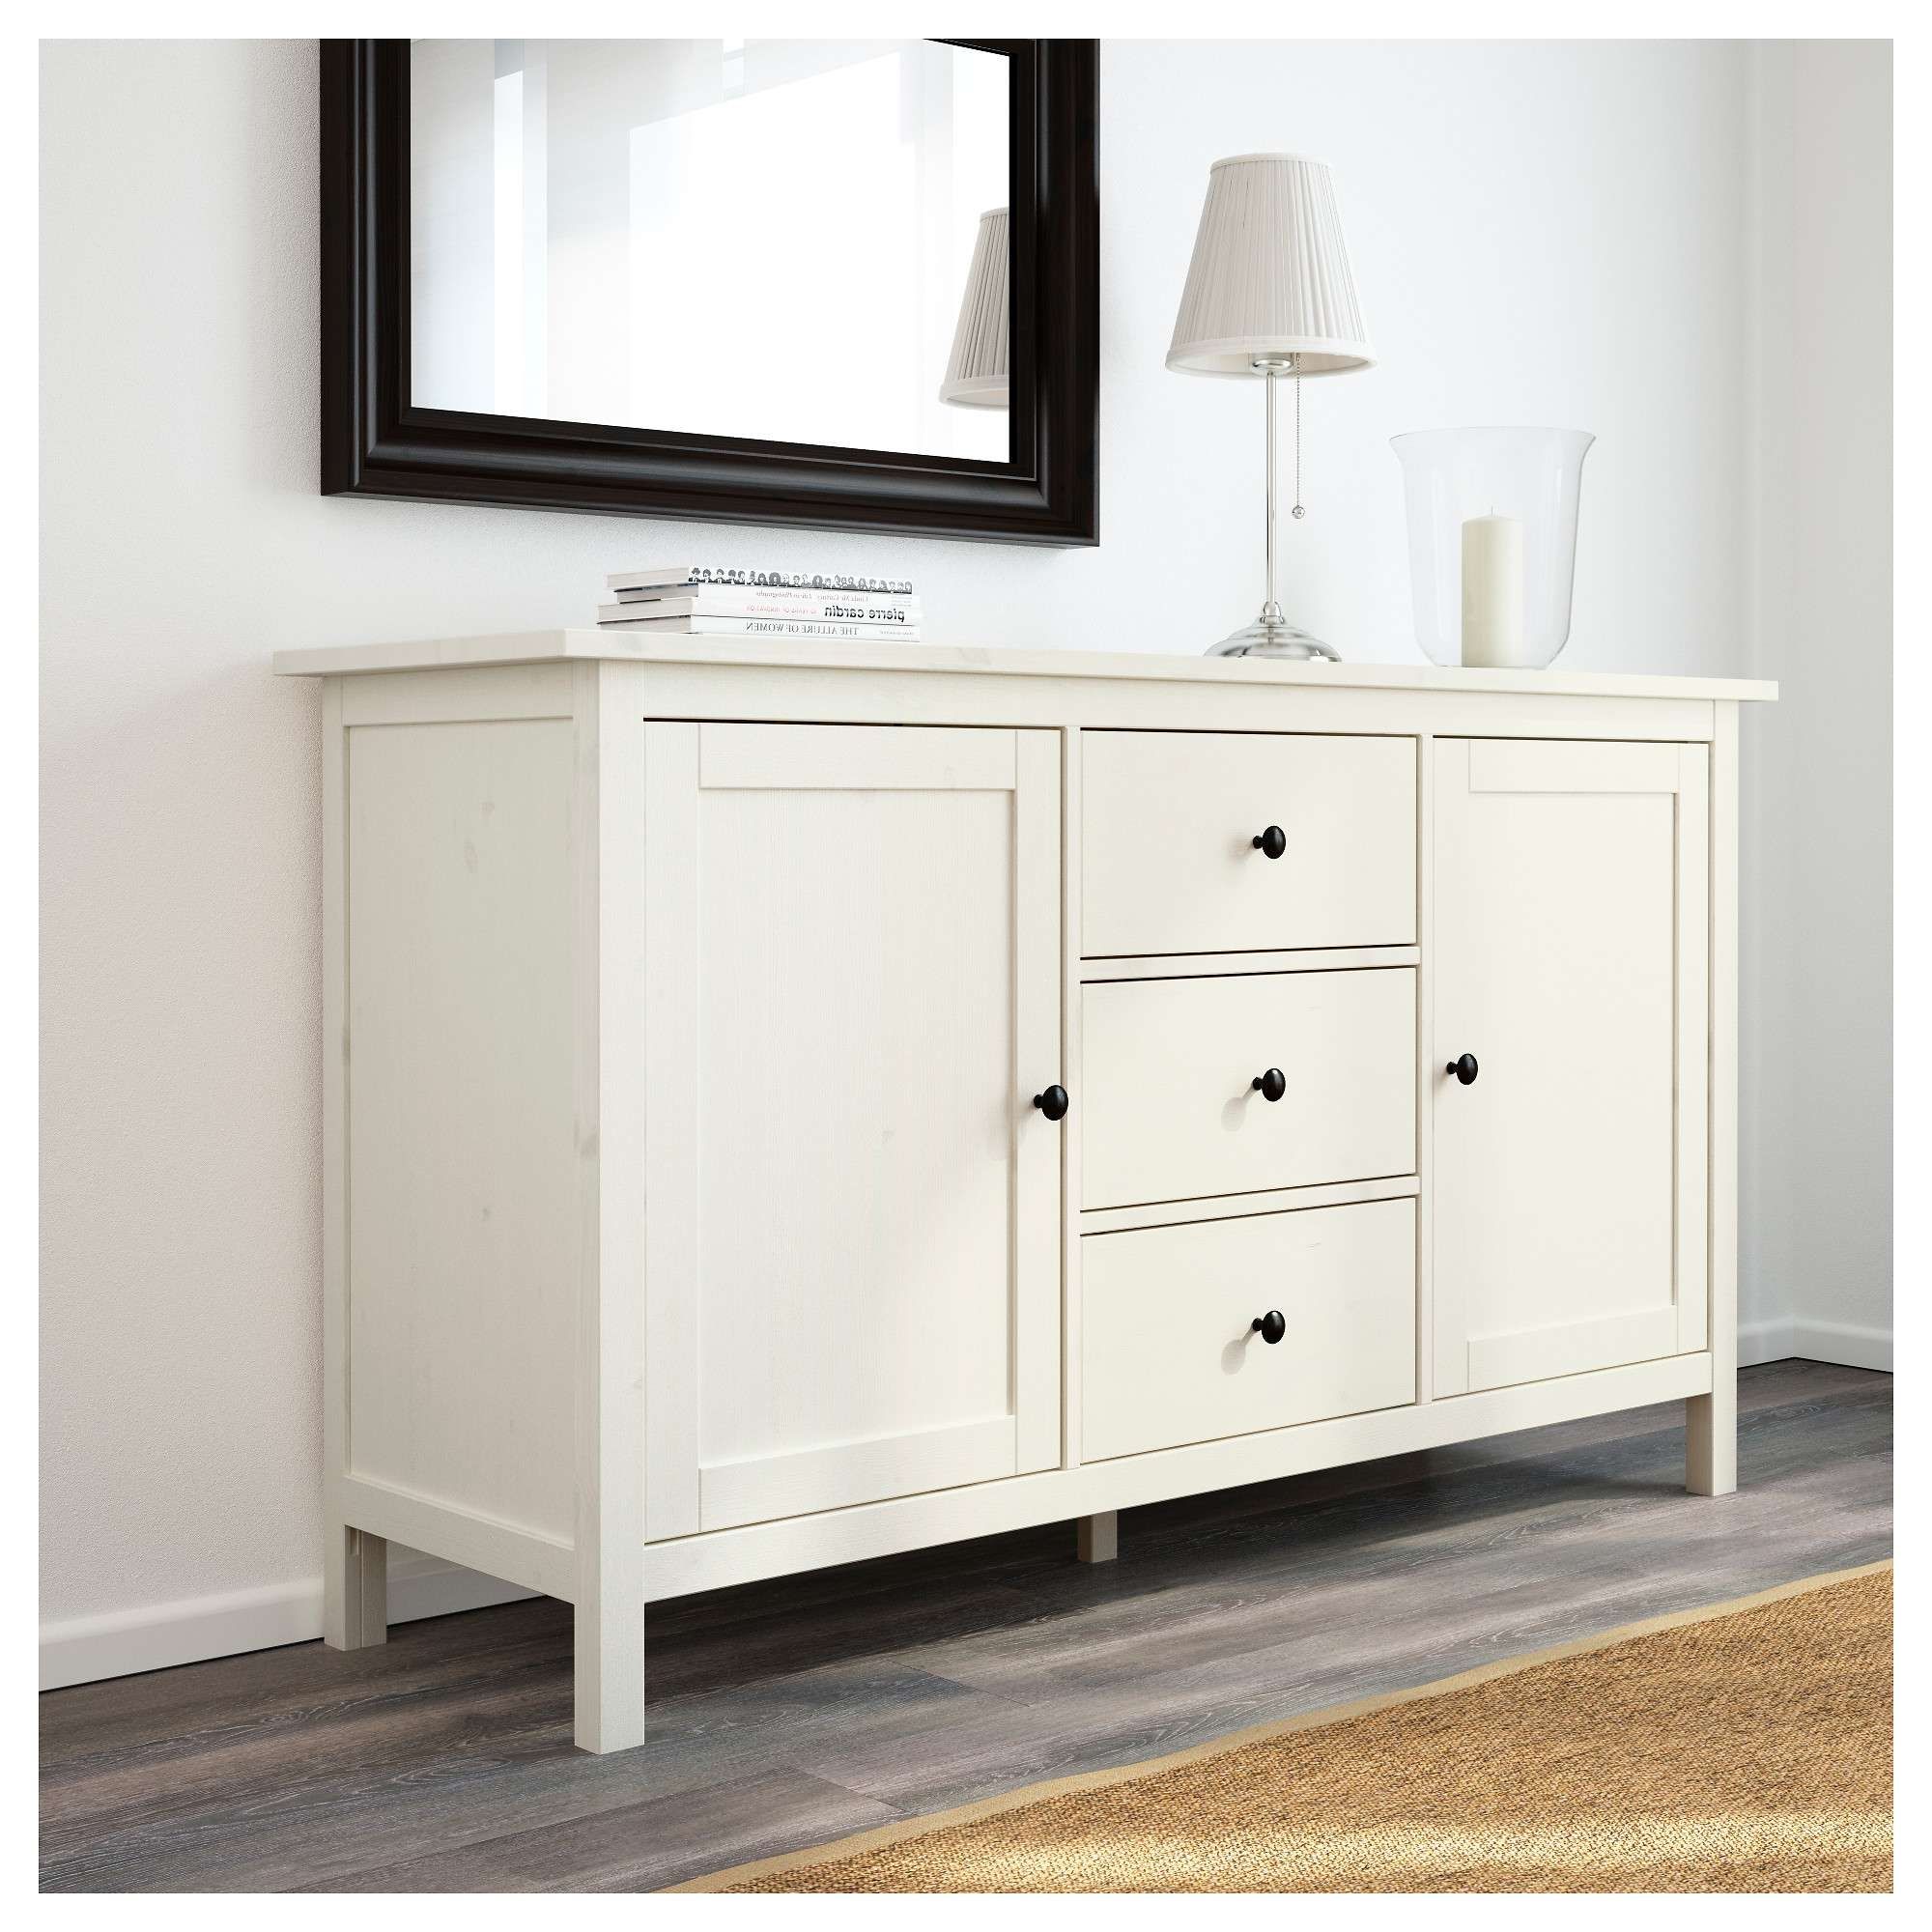 Hemnes Sideboard – White Stain – Ikea With Regard To Hemnes Sideboards (View 1 of 20)